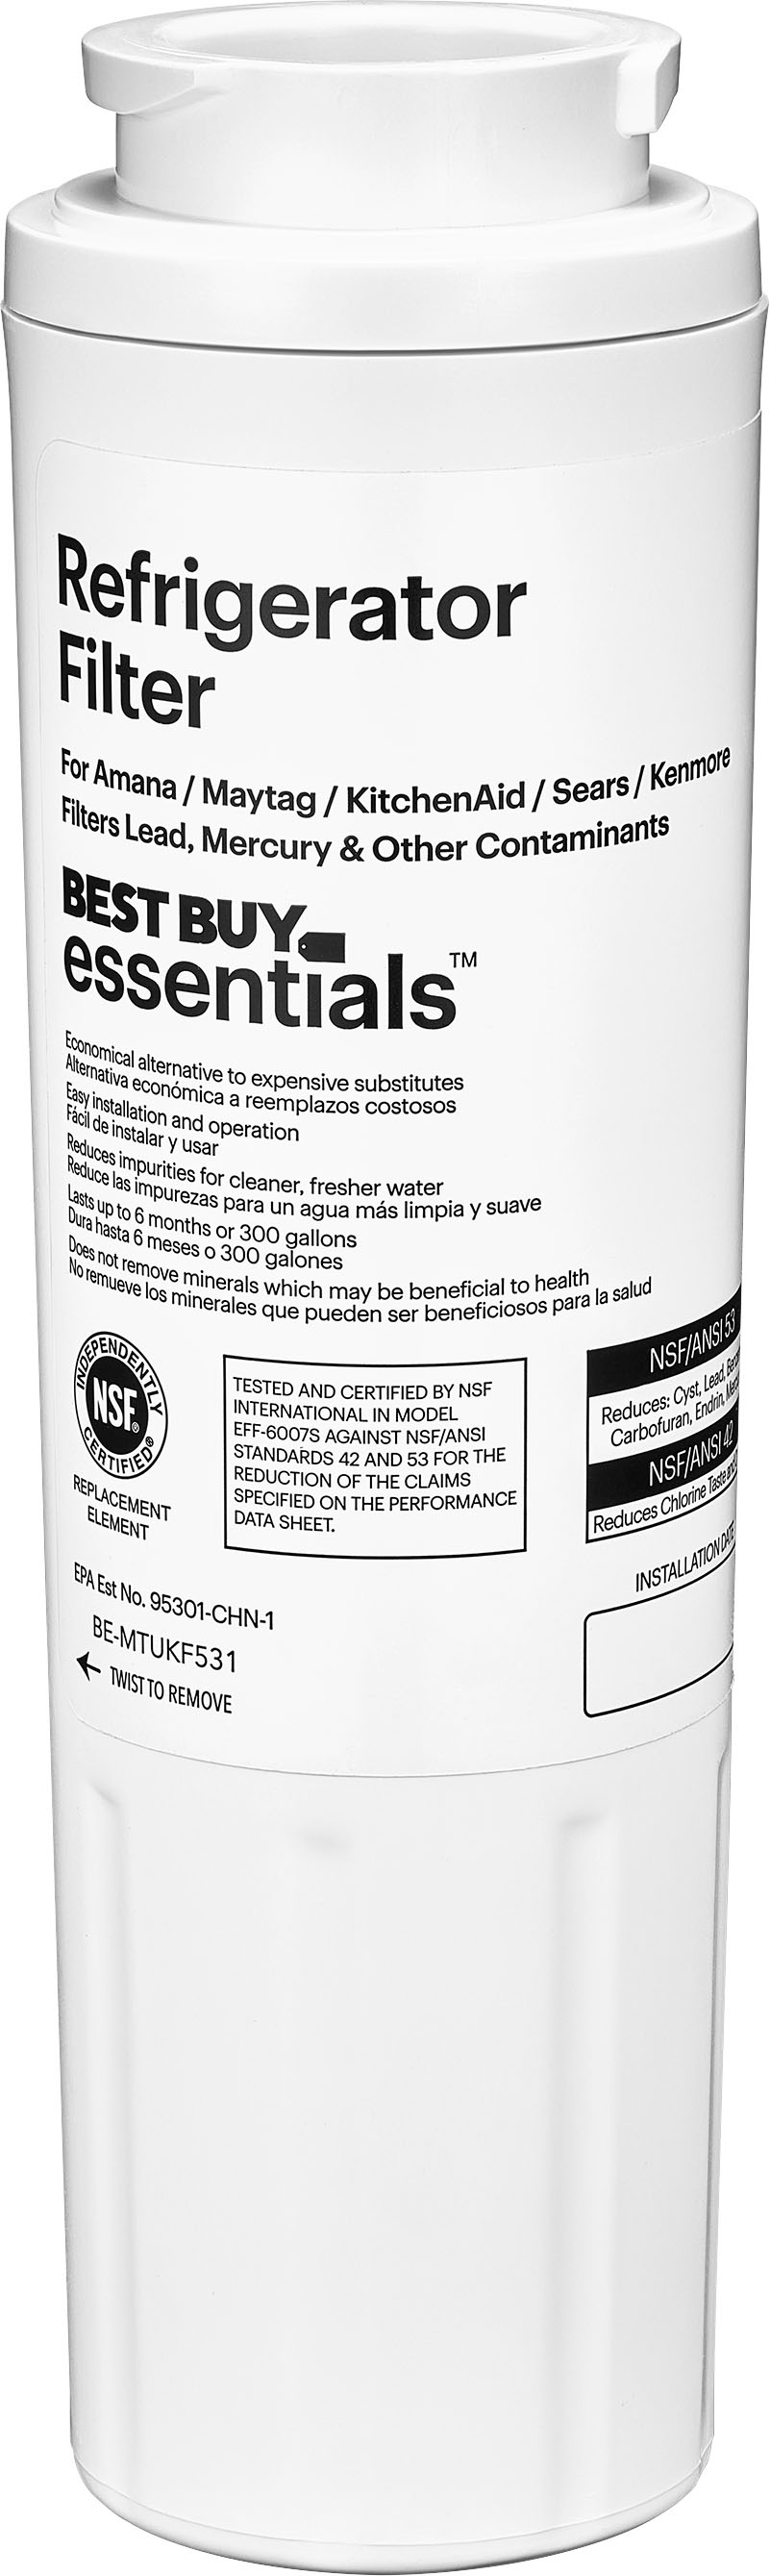 Druif Expertise Beweren Best Buy essentials™ NSF 42/53 Water Filter Replacement for Select  Amana/Maytag, KitchenAid and Sears/Kenmore Refrigerators White BE-MTUKF531  - Best Buy